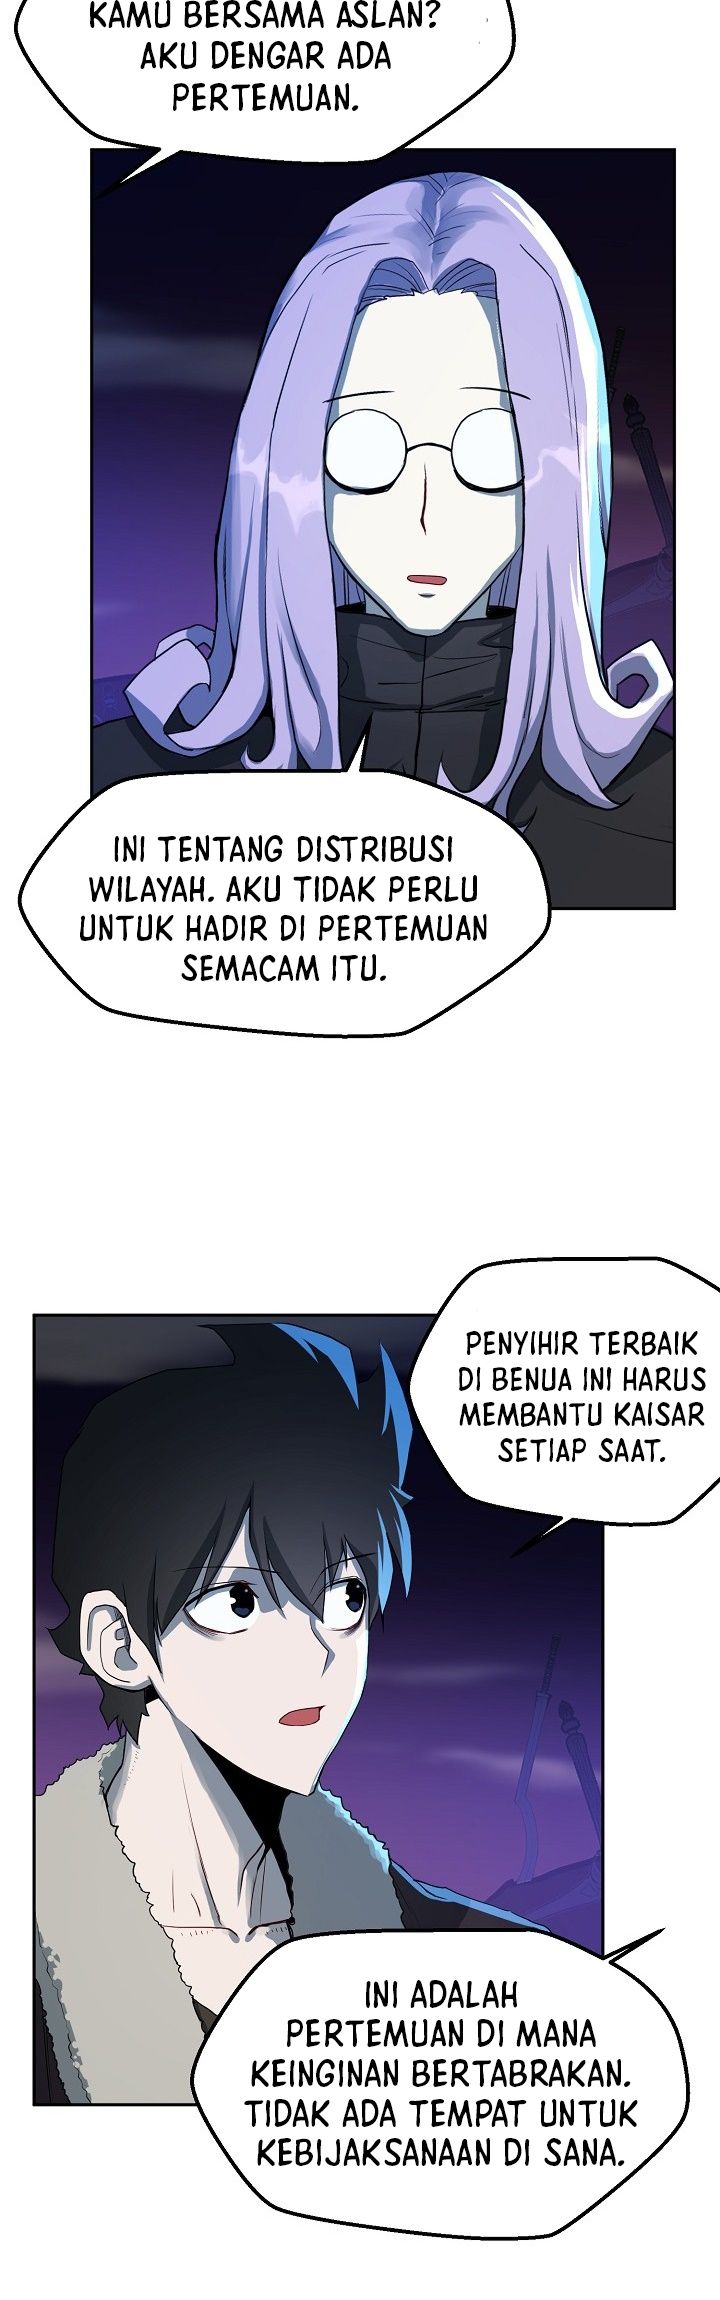 Jobless, Yet Invincible Chapter 01 bahassa indonesia